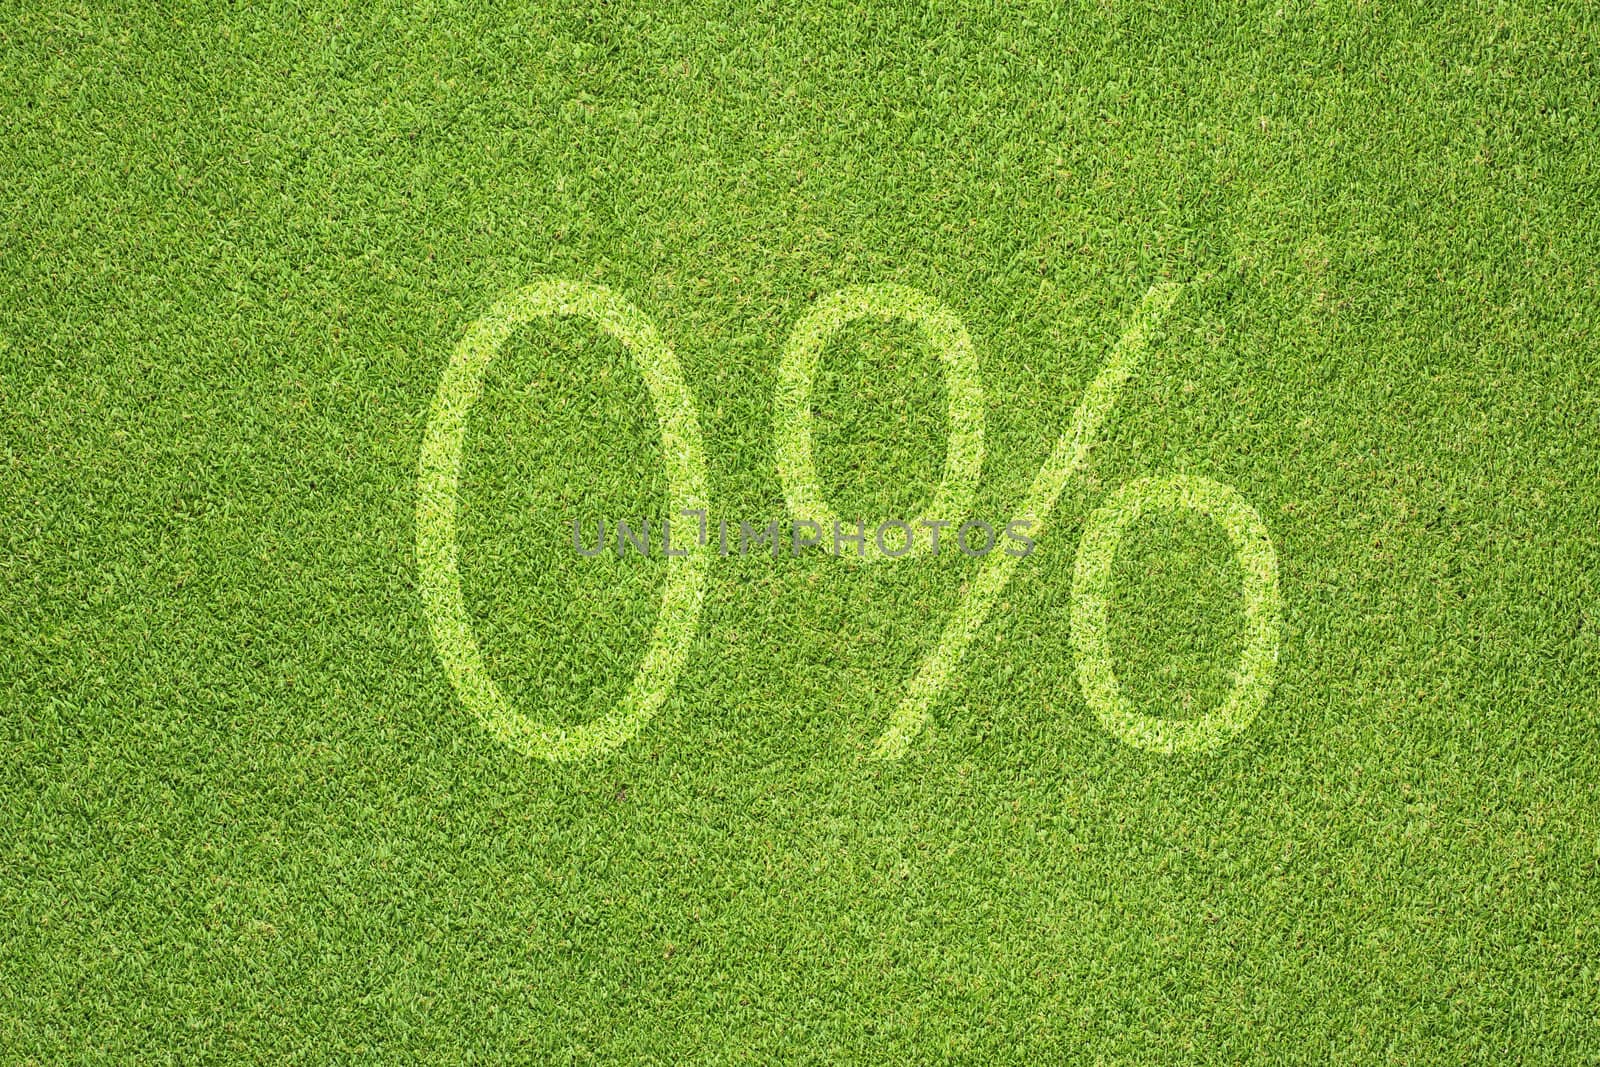 Percent icon on green grass texture and background 